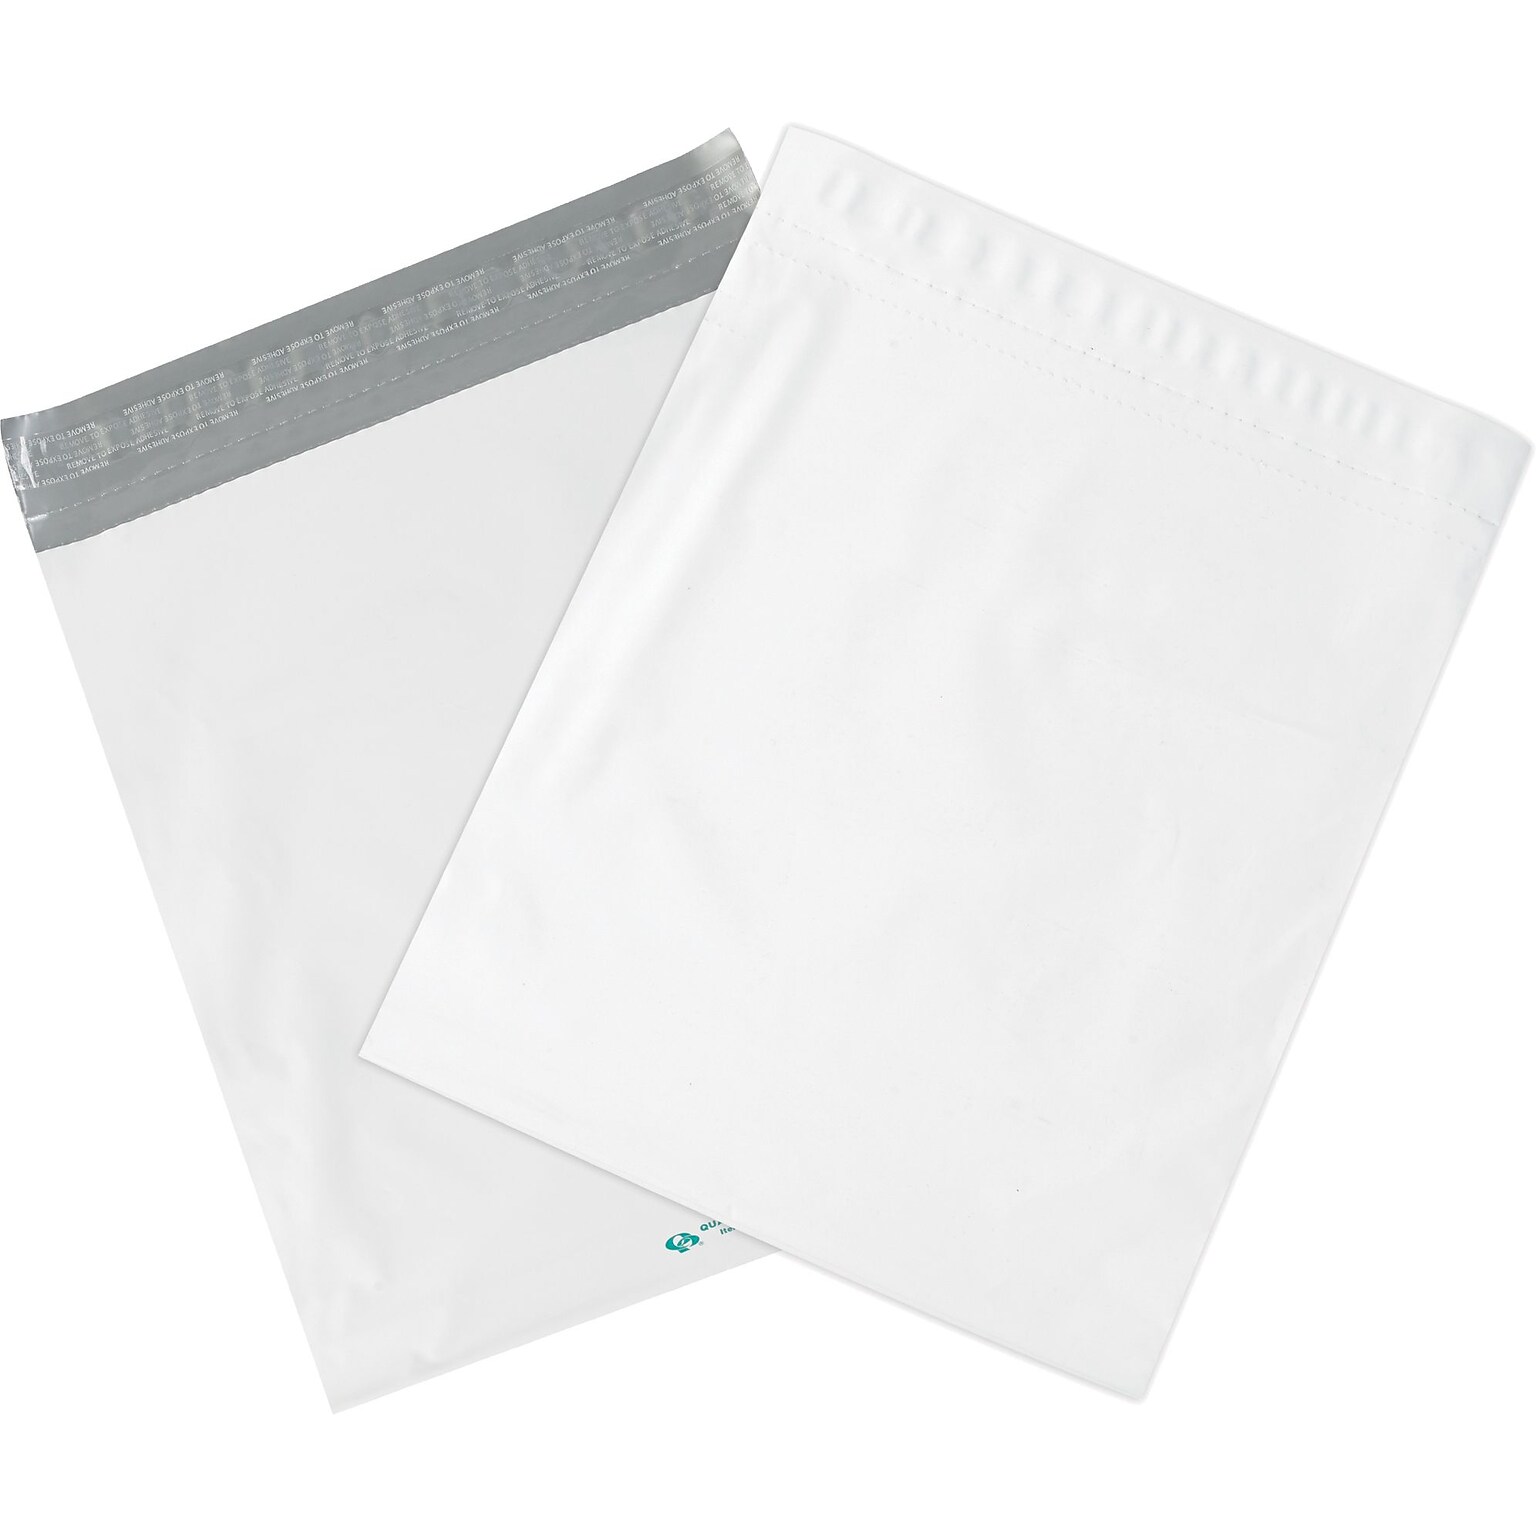 Partners Brand Expansion Poly Mailers, 26 x 28 x 5, White, 100/Case (EPM26285)